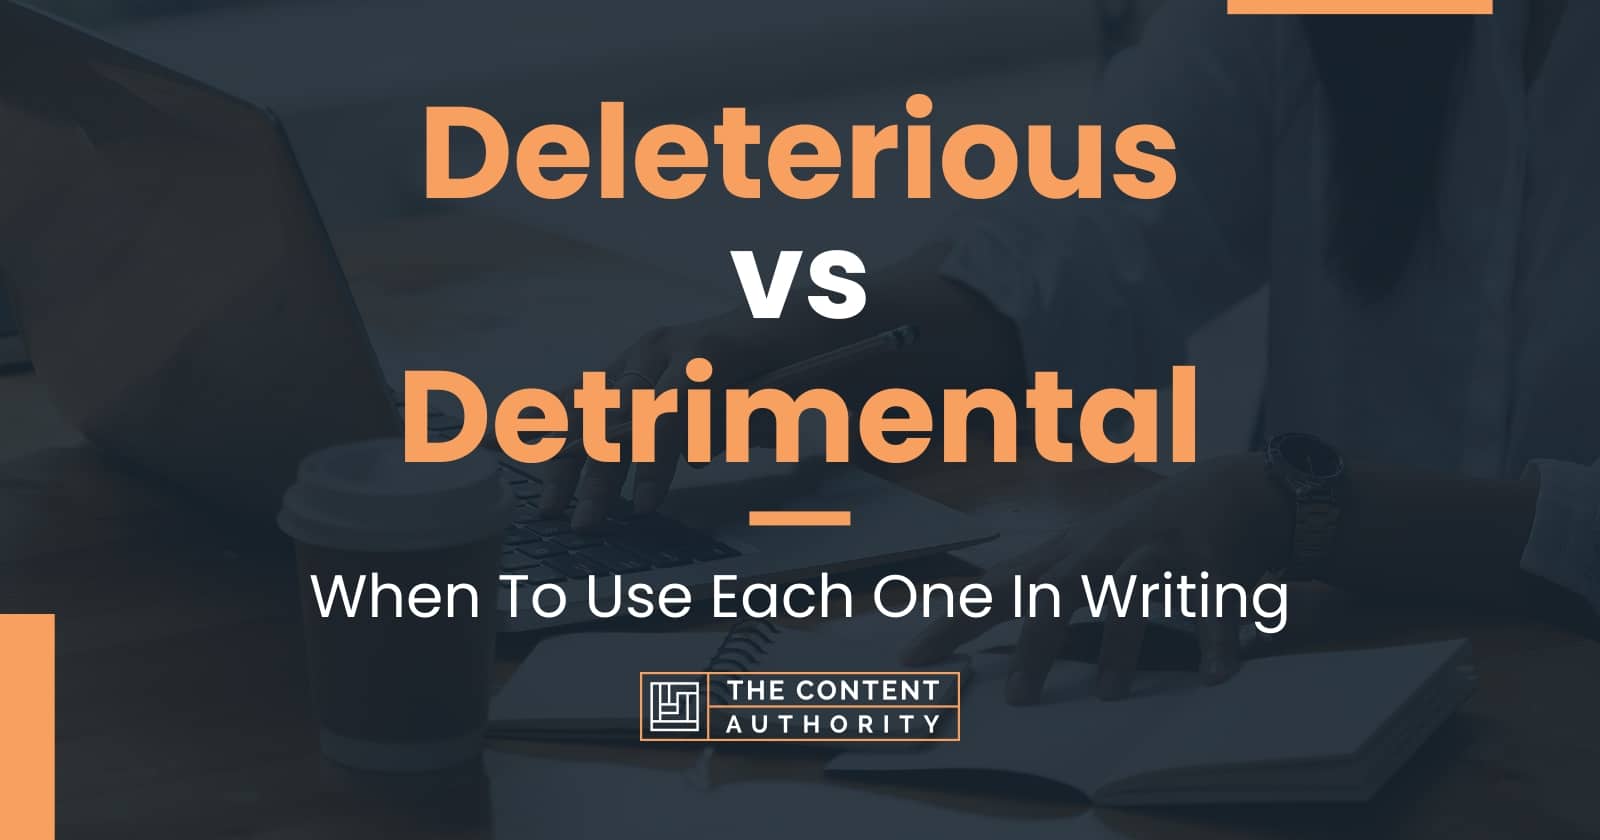 Deleterious vs Detrimental: When To Use Each One In Writing